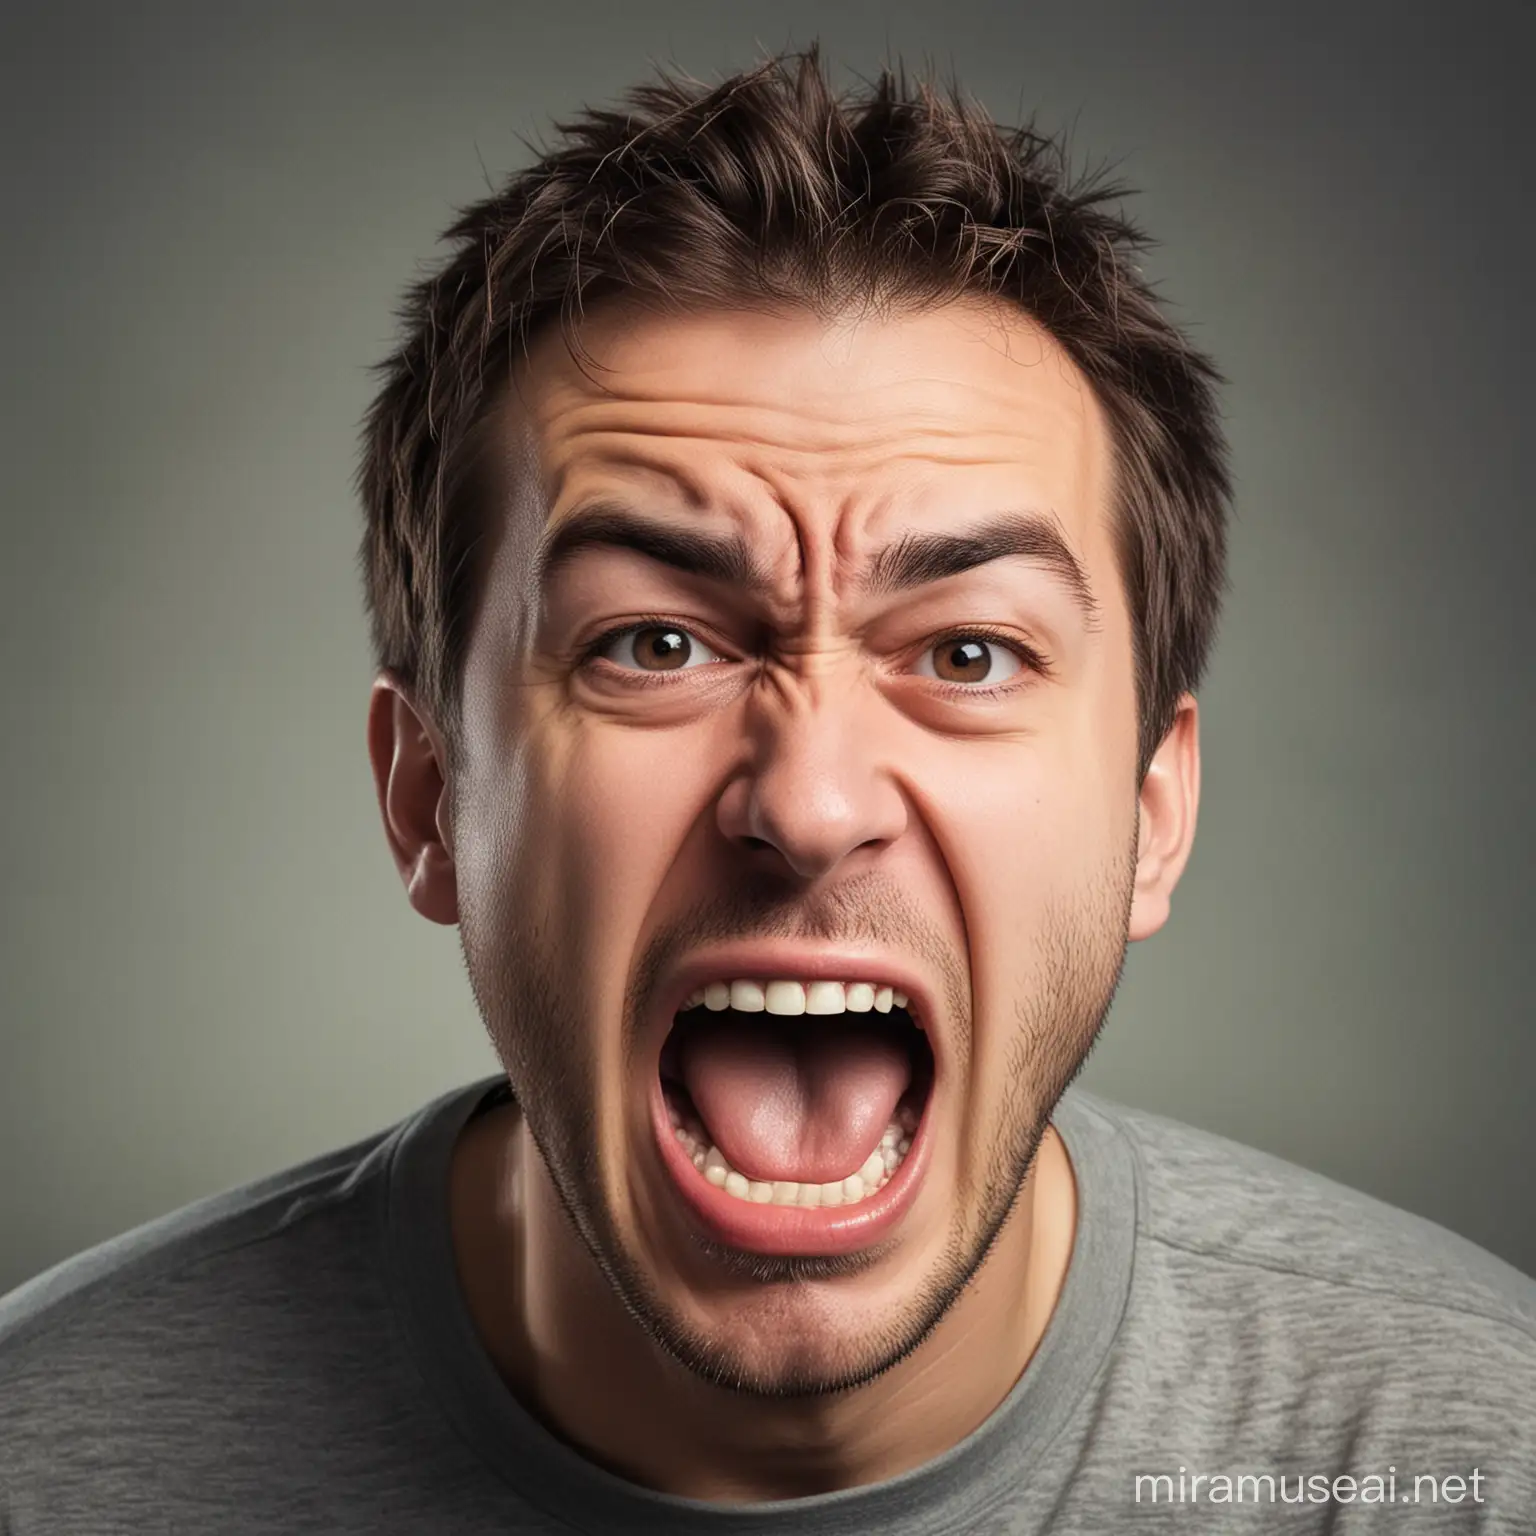 Expressive Man Screaming in Frustration